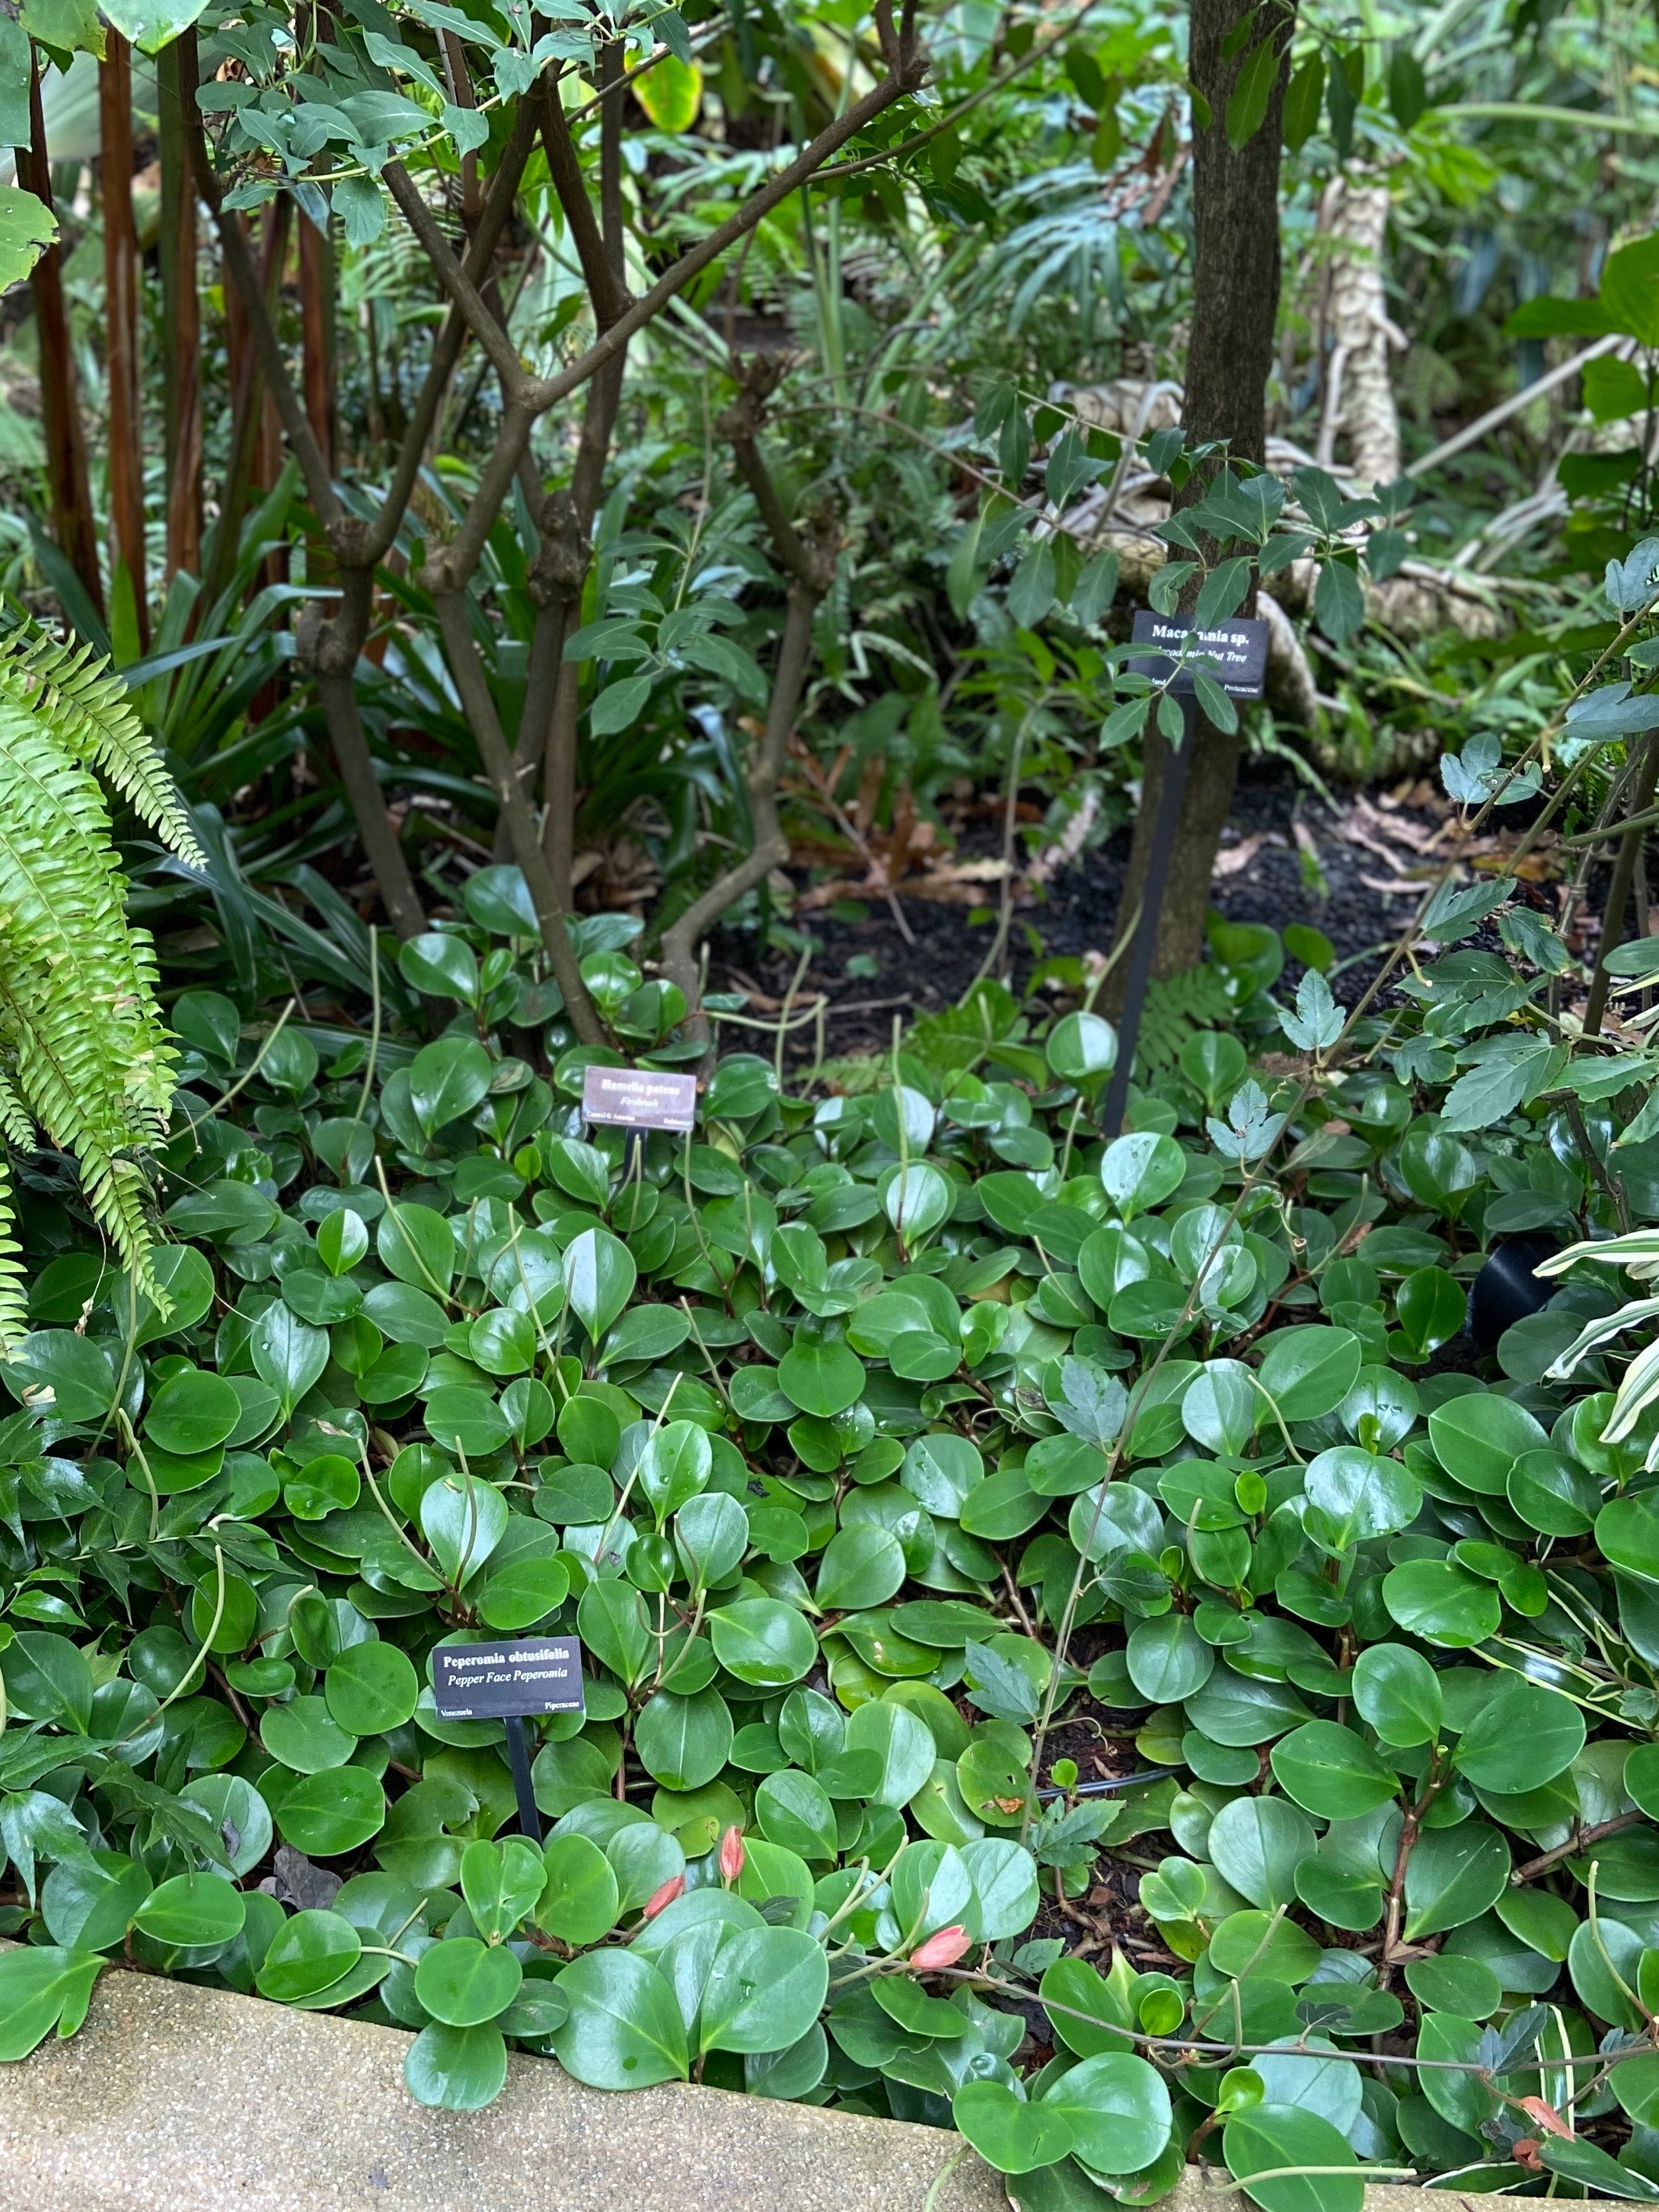 Peperomia obtusifolia growing as ground covering at a tropical botanic garden.